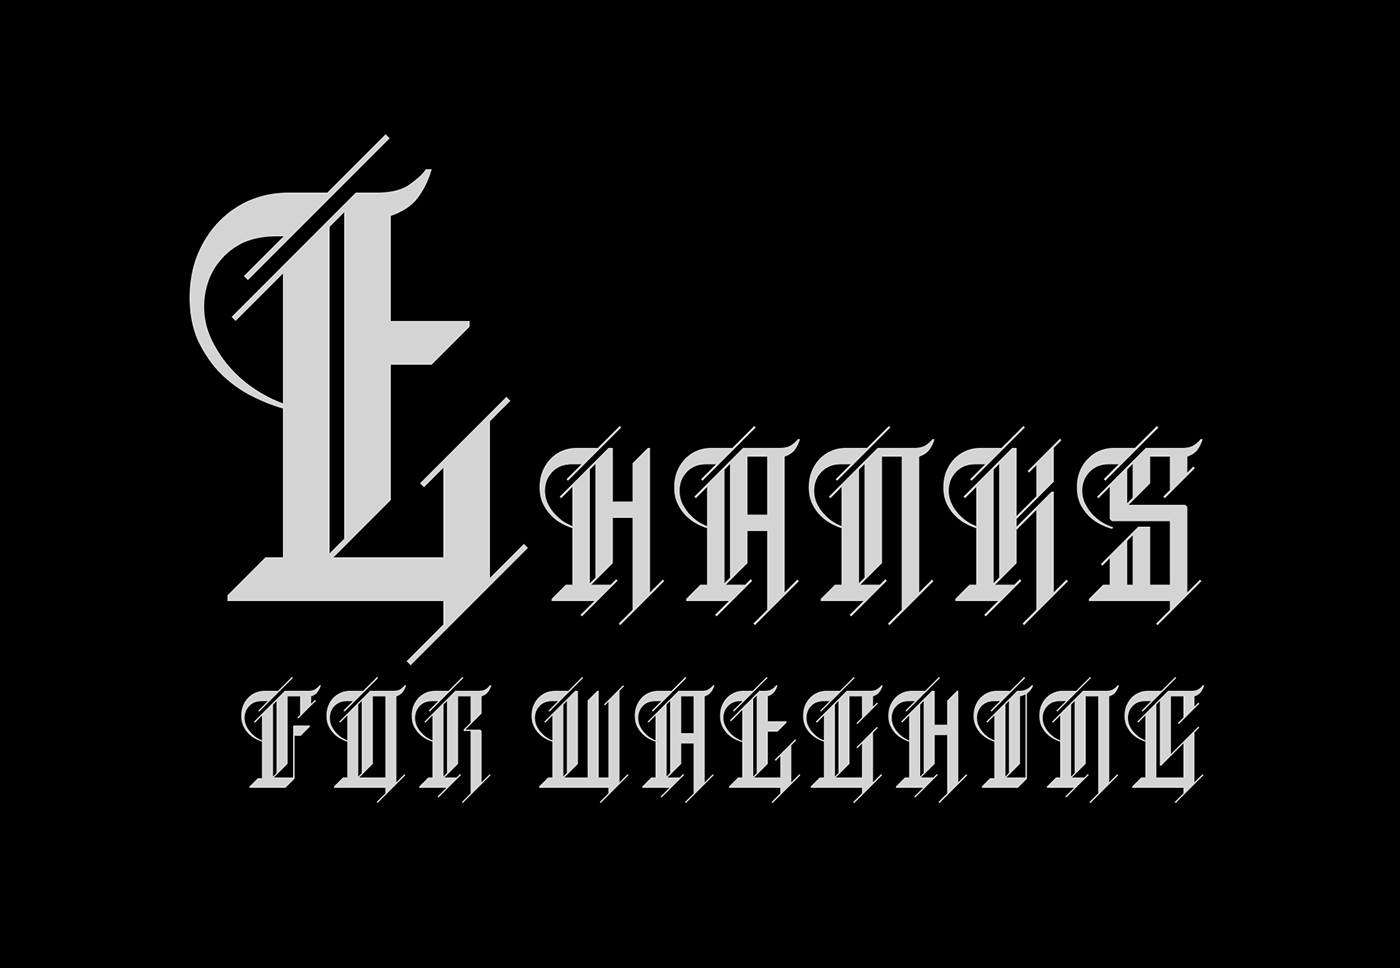 Display font type gothic Blackletter display font Typeface typography   horror tattoo